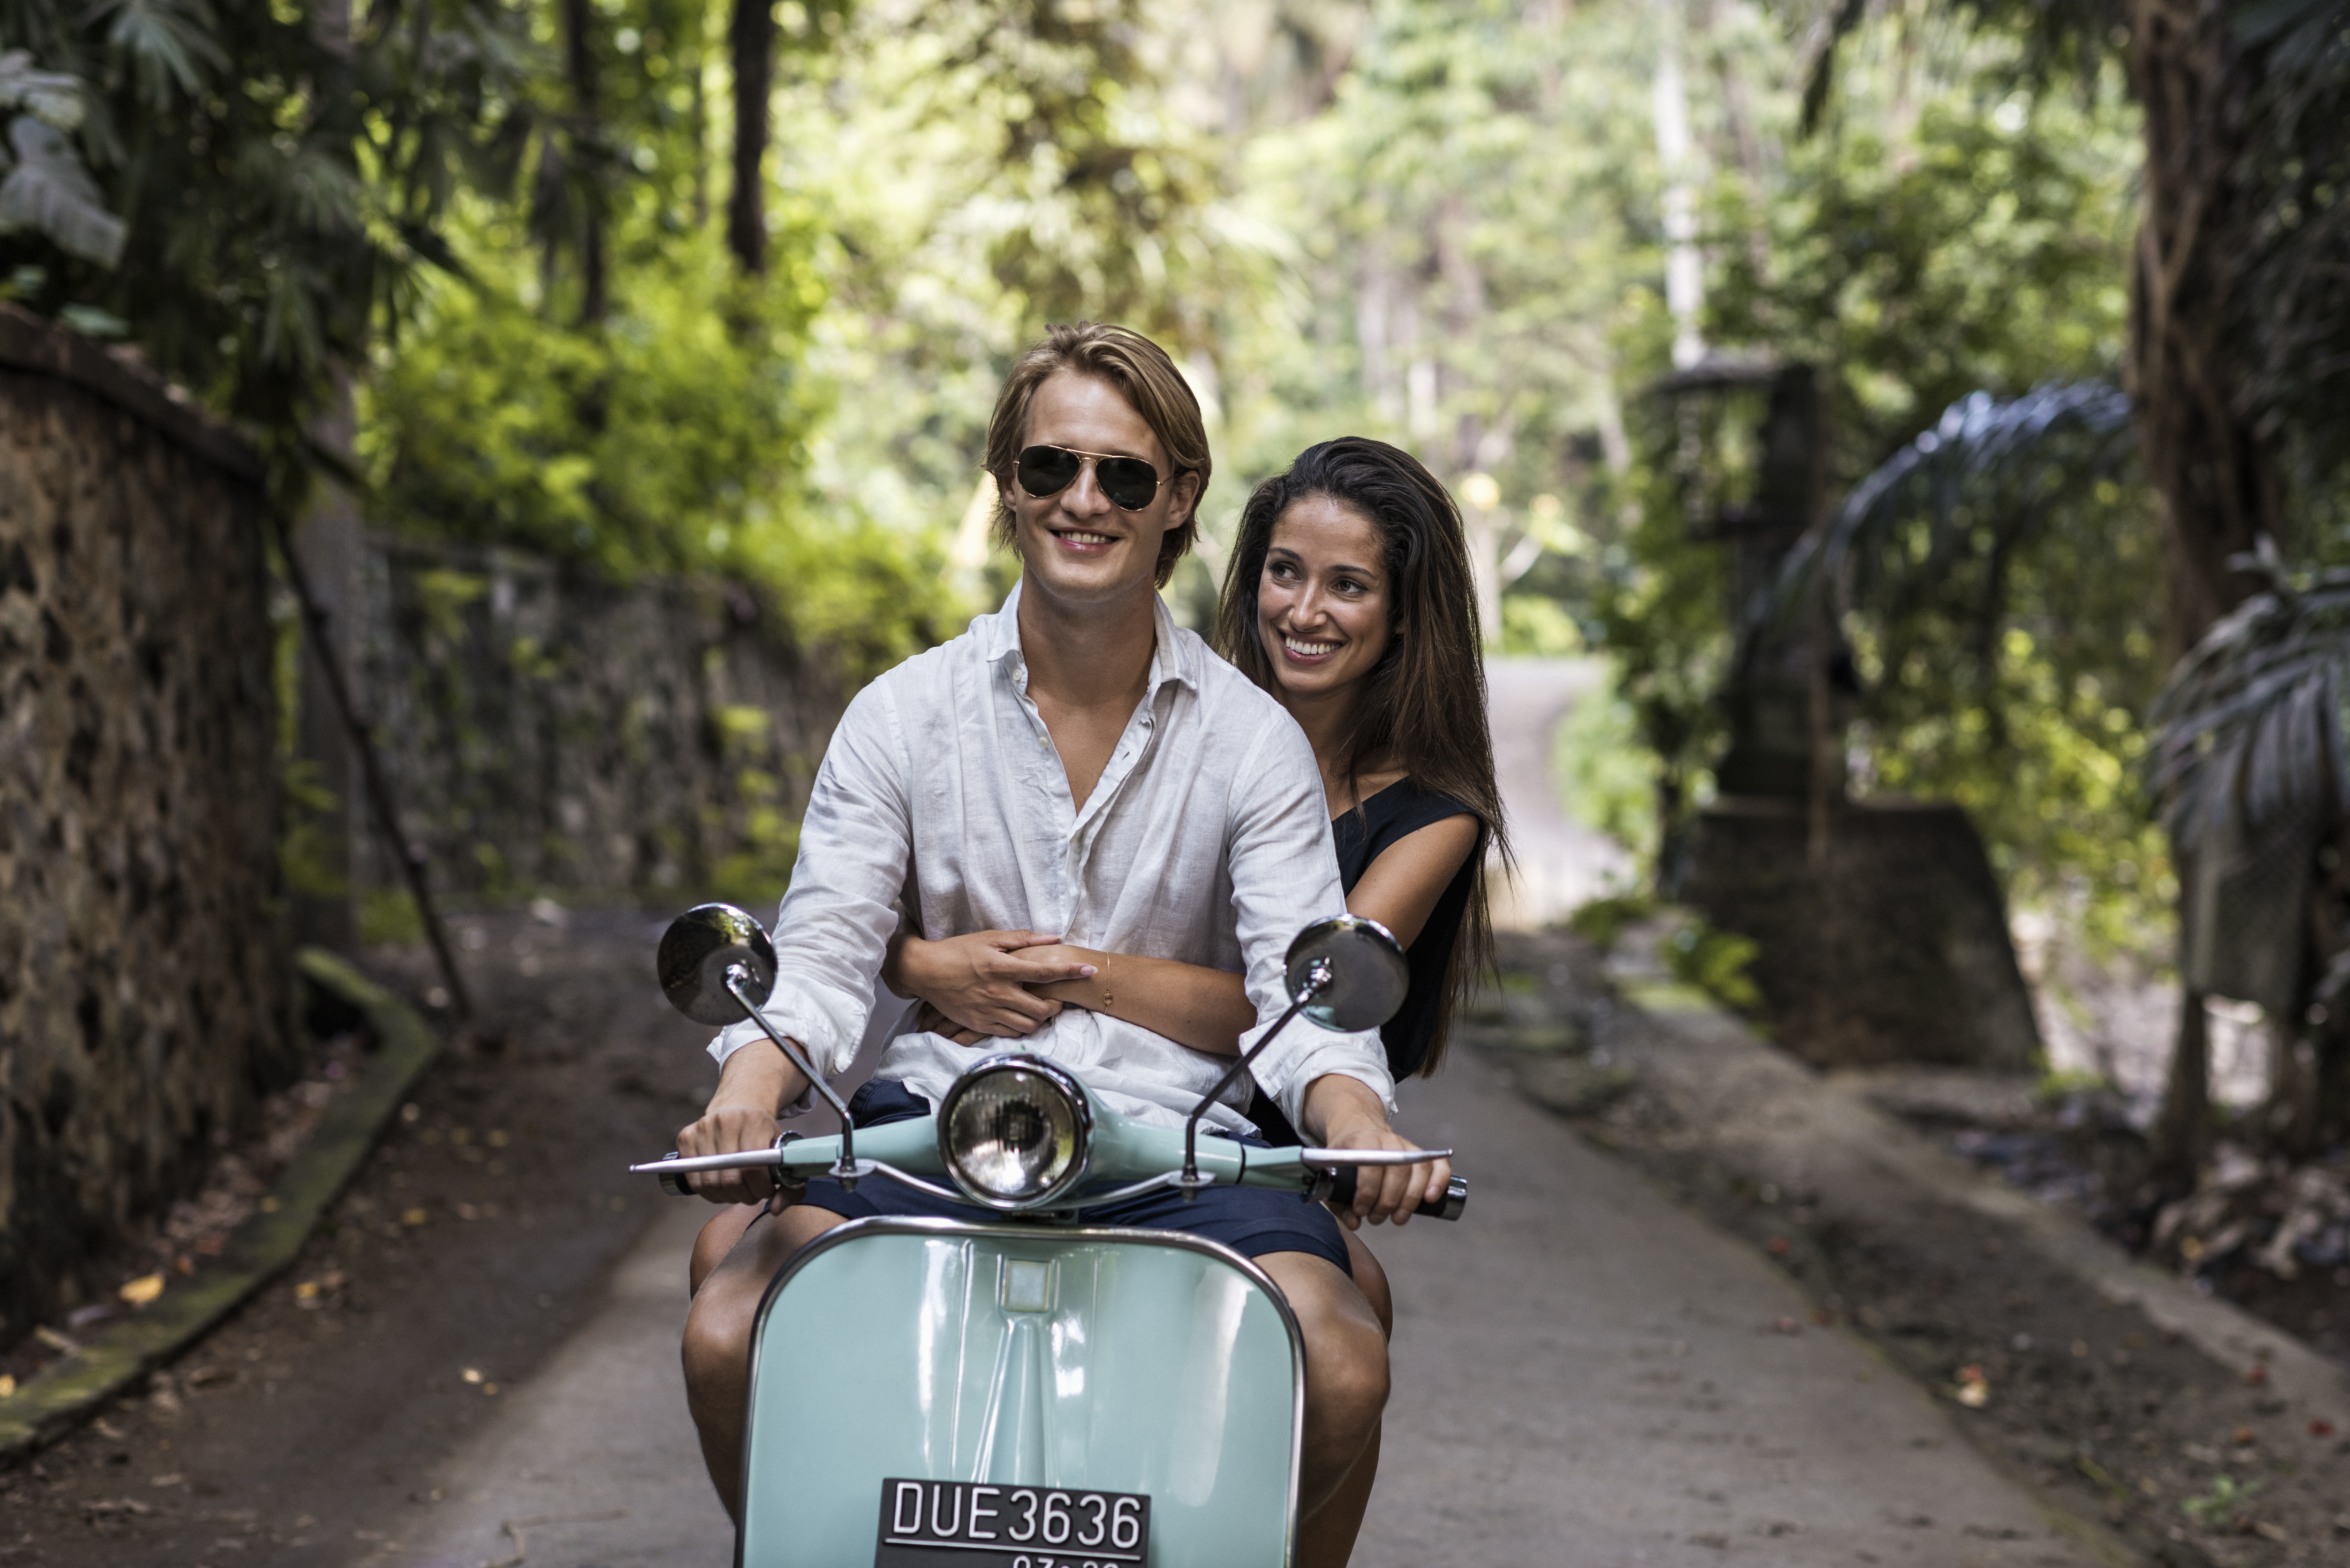 Young couple riding classic scooter during vacation in Bali | Source: Getty Images